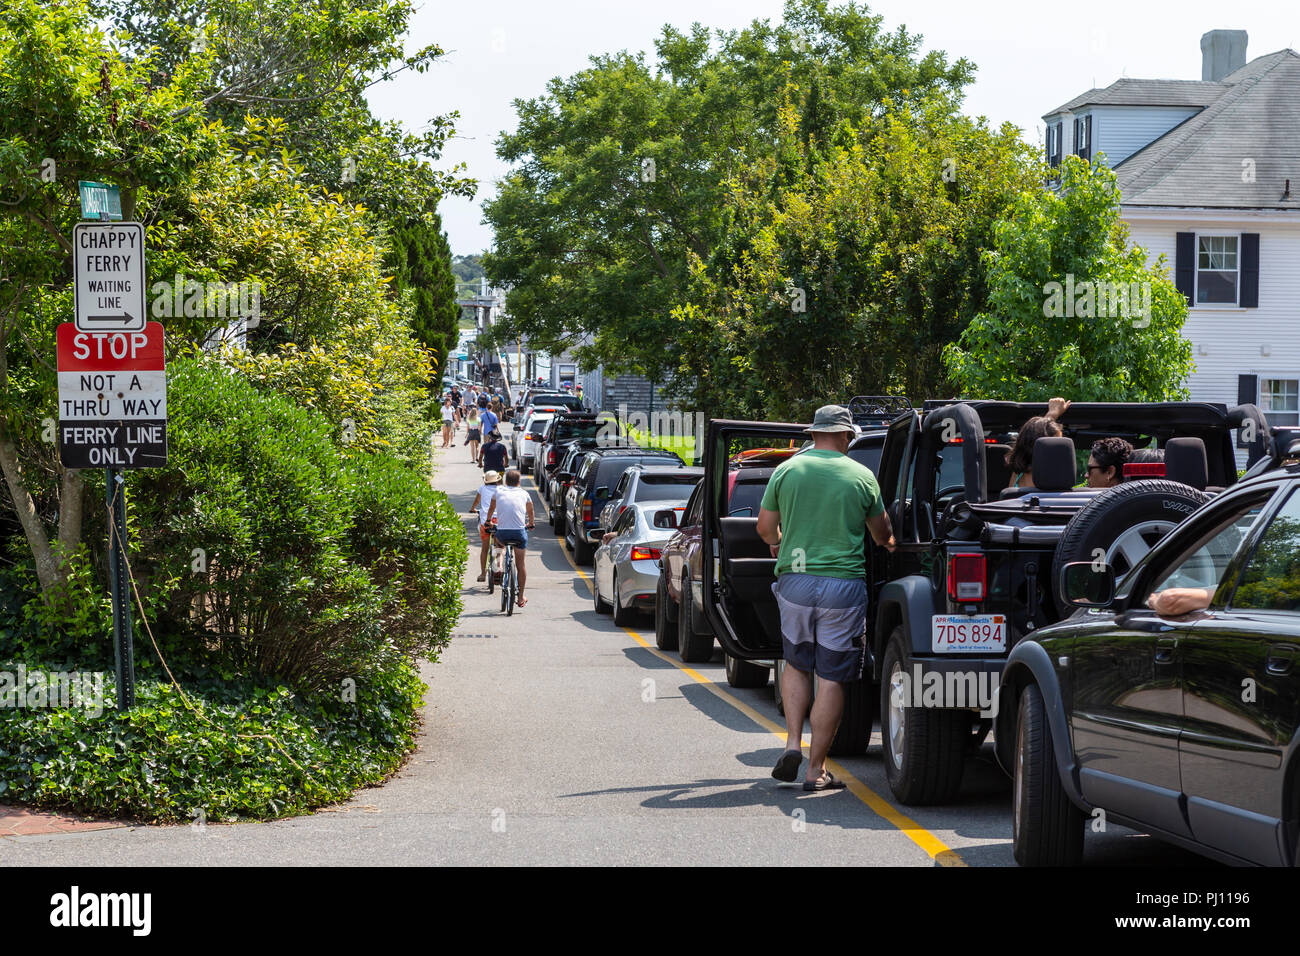 A long line of cars waits on local streets to take the Chappy Ferry to Chappaquiddick Island in Edgartown, Massachusetts on Martha's Vineyard. Stock Photo